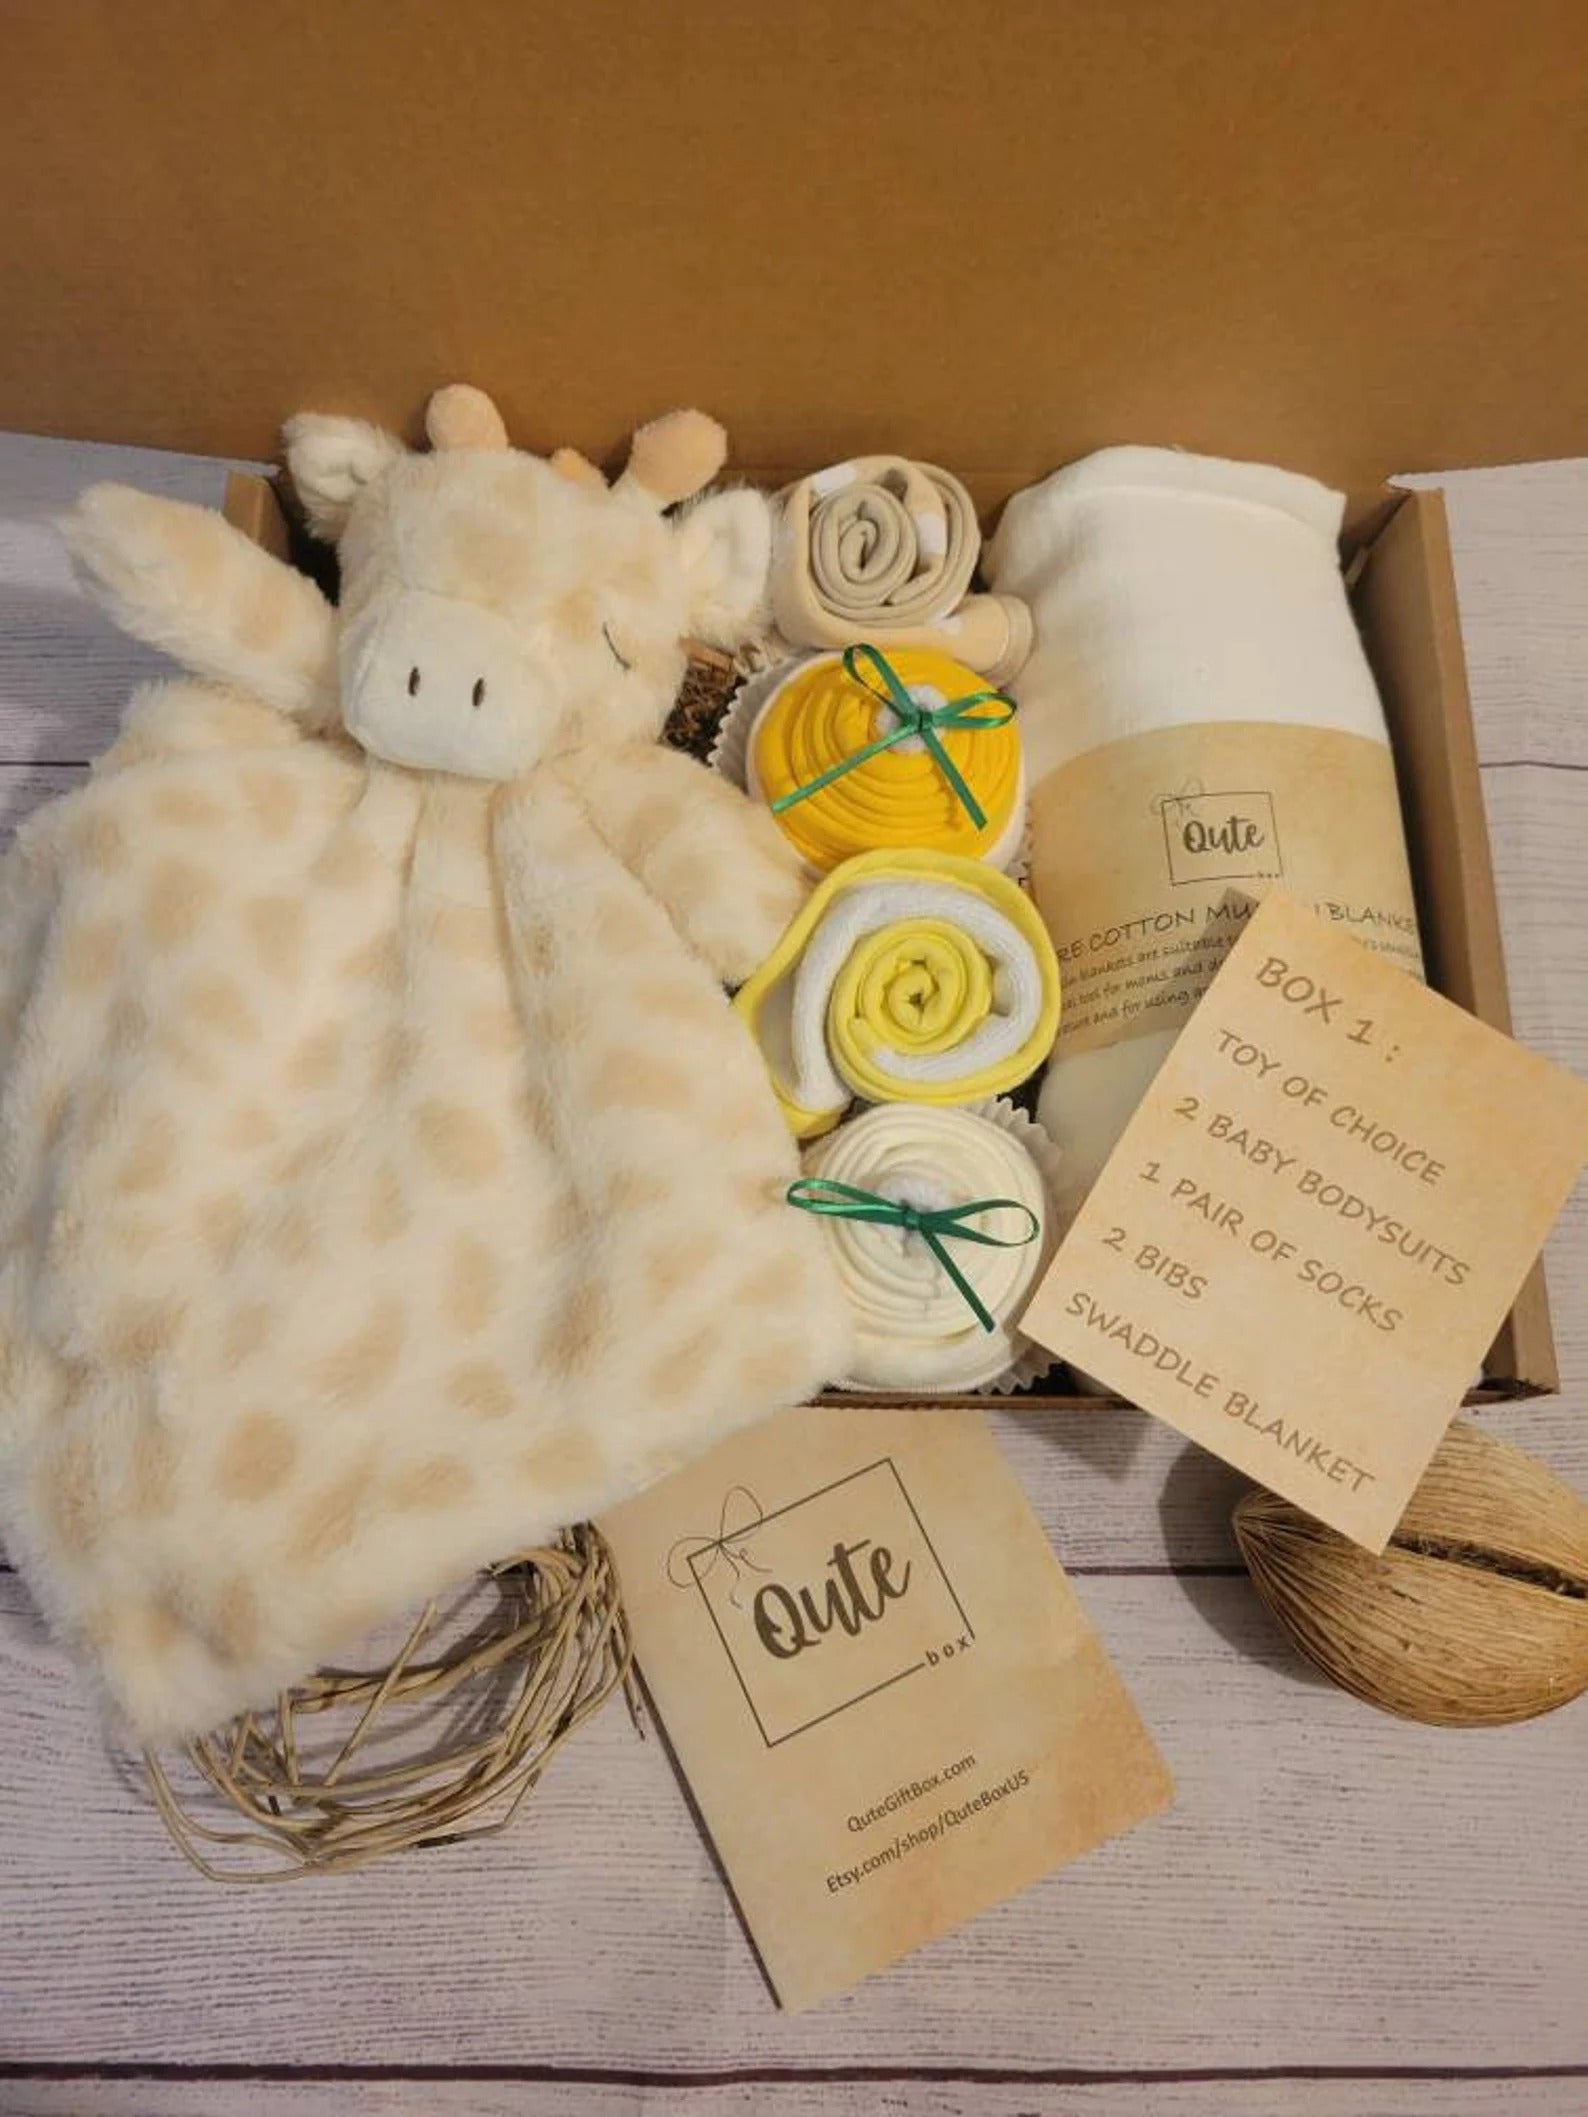 Brown box filled with plush giraffe toy, white rolled up blanket, and yellow, brown, and white rolled baby clothes and bibs